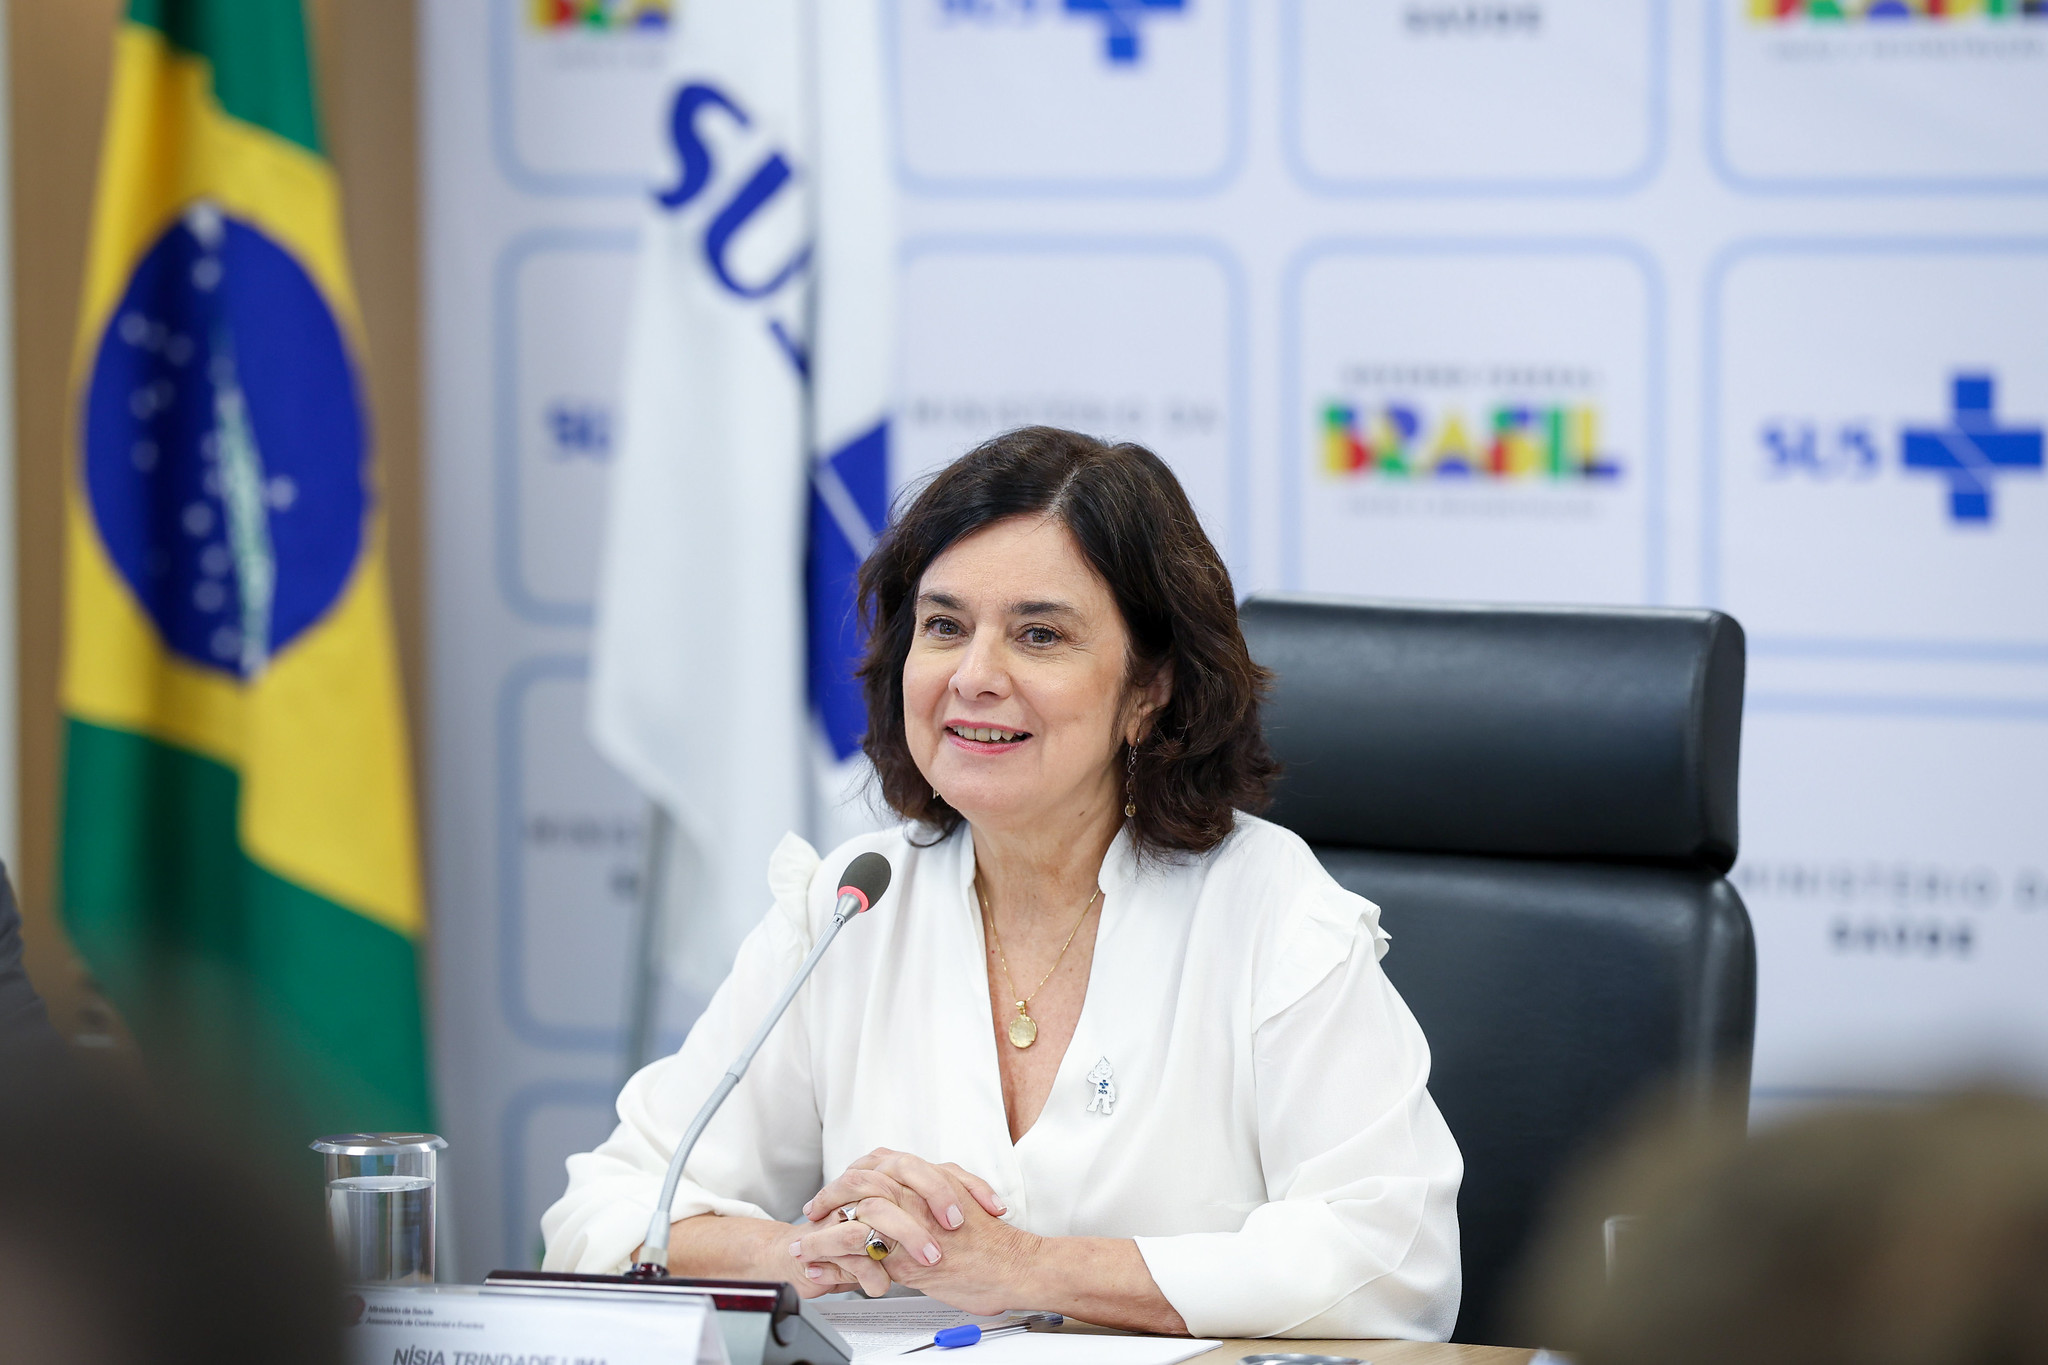 Nísia Trindade, Brasil's Minister of Health | Photo: Walterson Rosa/Ministry of Health